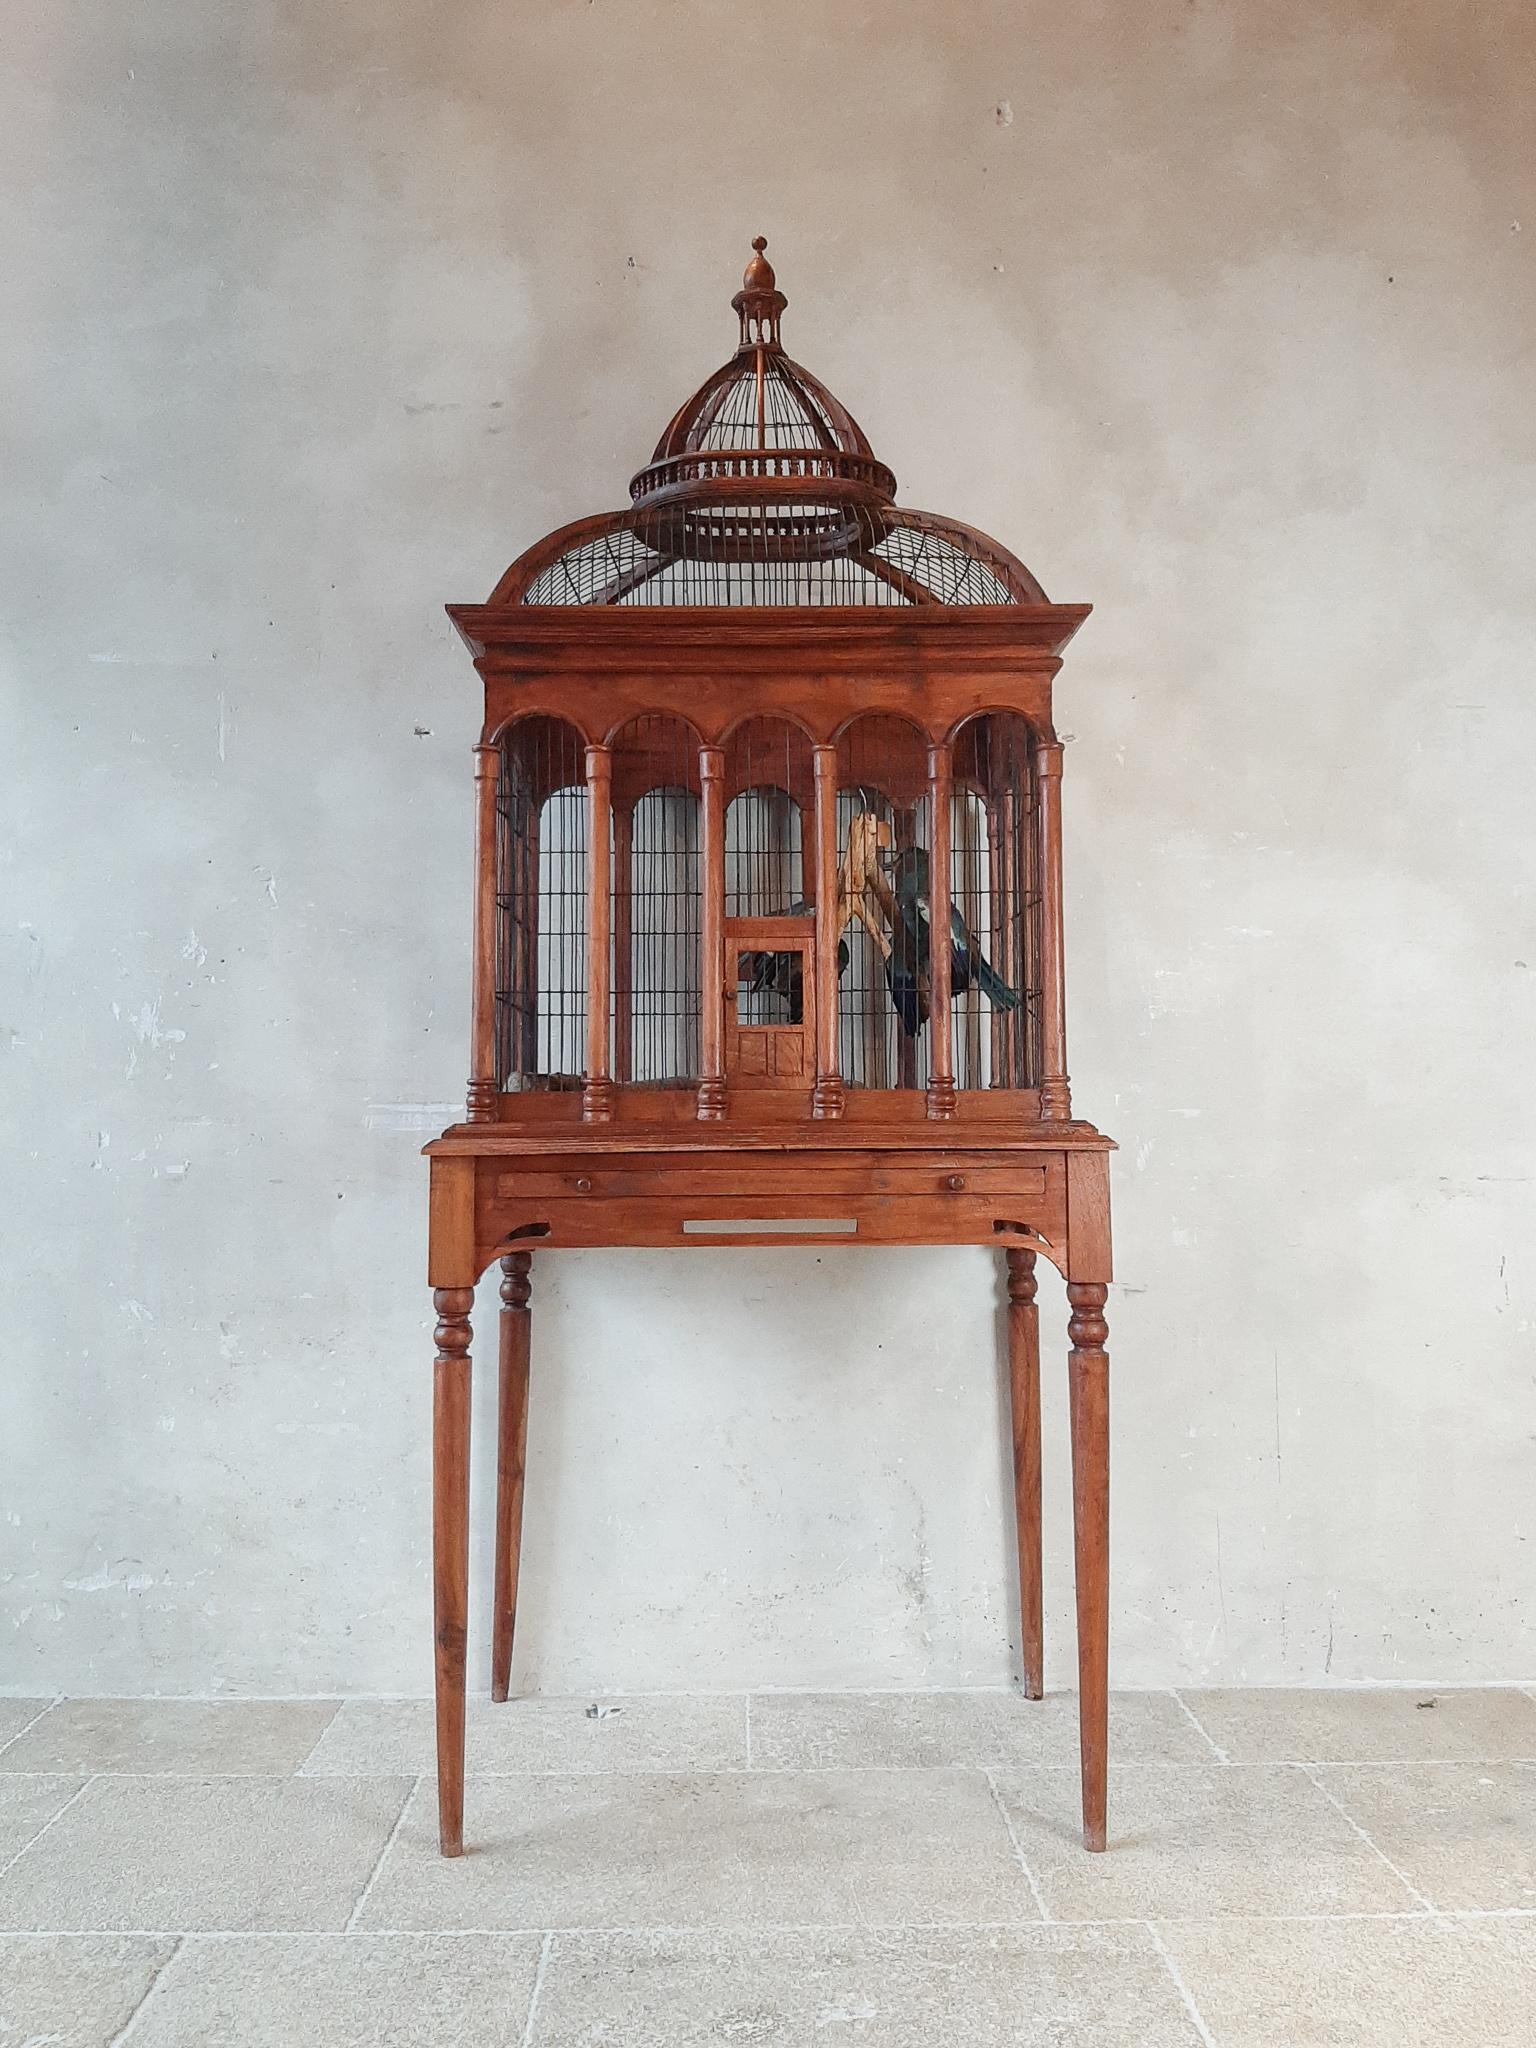 Large, wooden, highly decorative bird cage table from the first half of the 20th century.

Dimensions: H 197 x W 80 x D 53 cm.